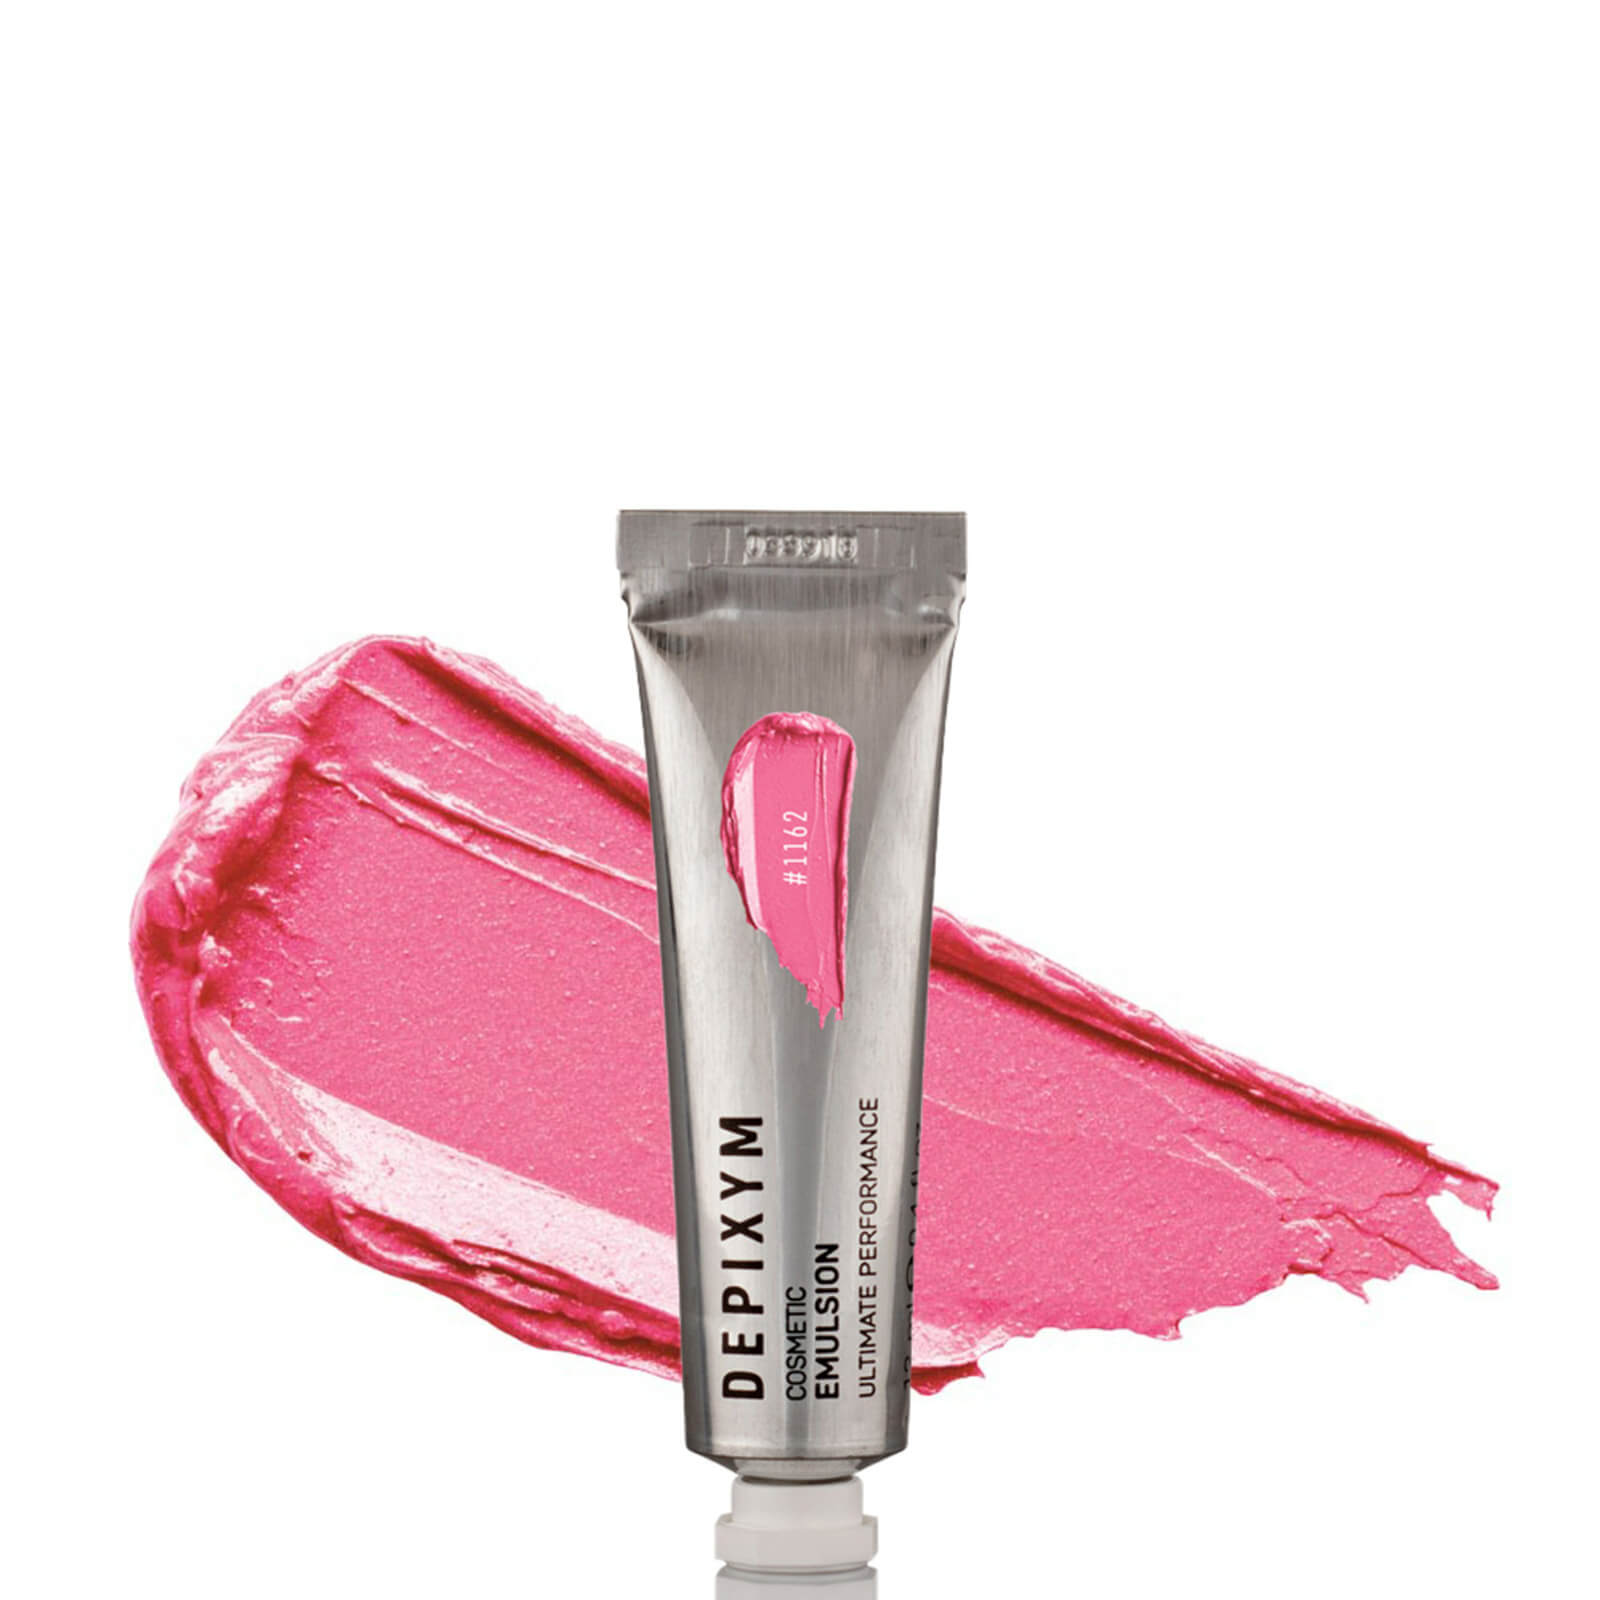 DEPIXYM Cosmetic Emulsion 12ml (Various Shades) - #1162 Bright Pink